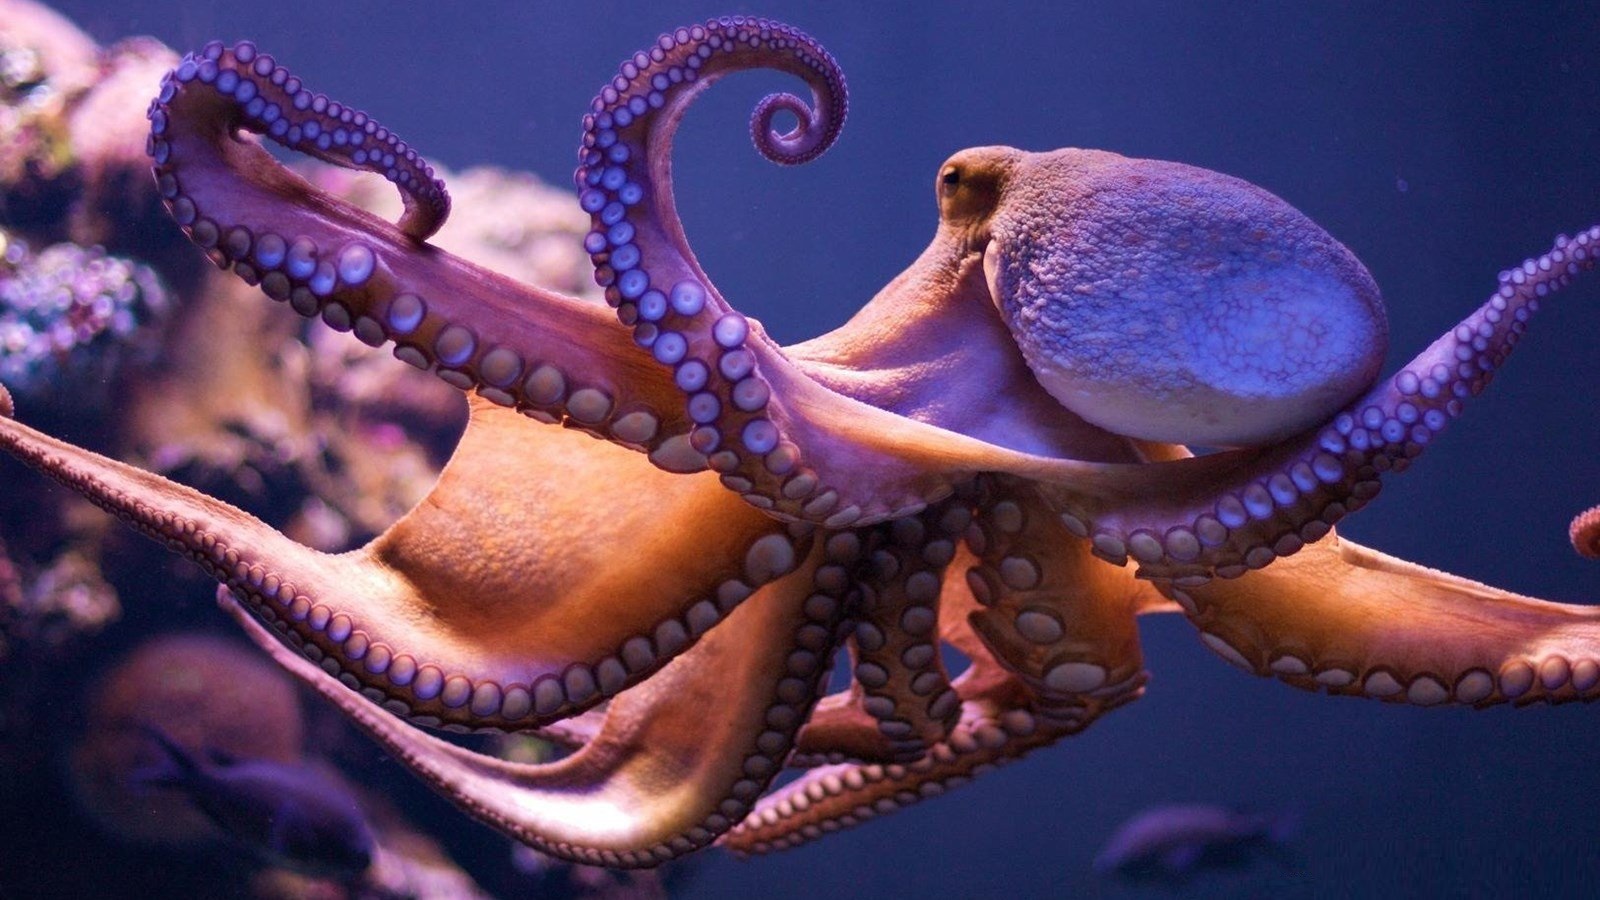 100 Octopus Pictures HD  Download Free Images on Unsplash